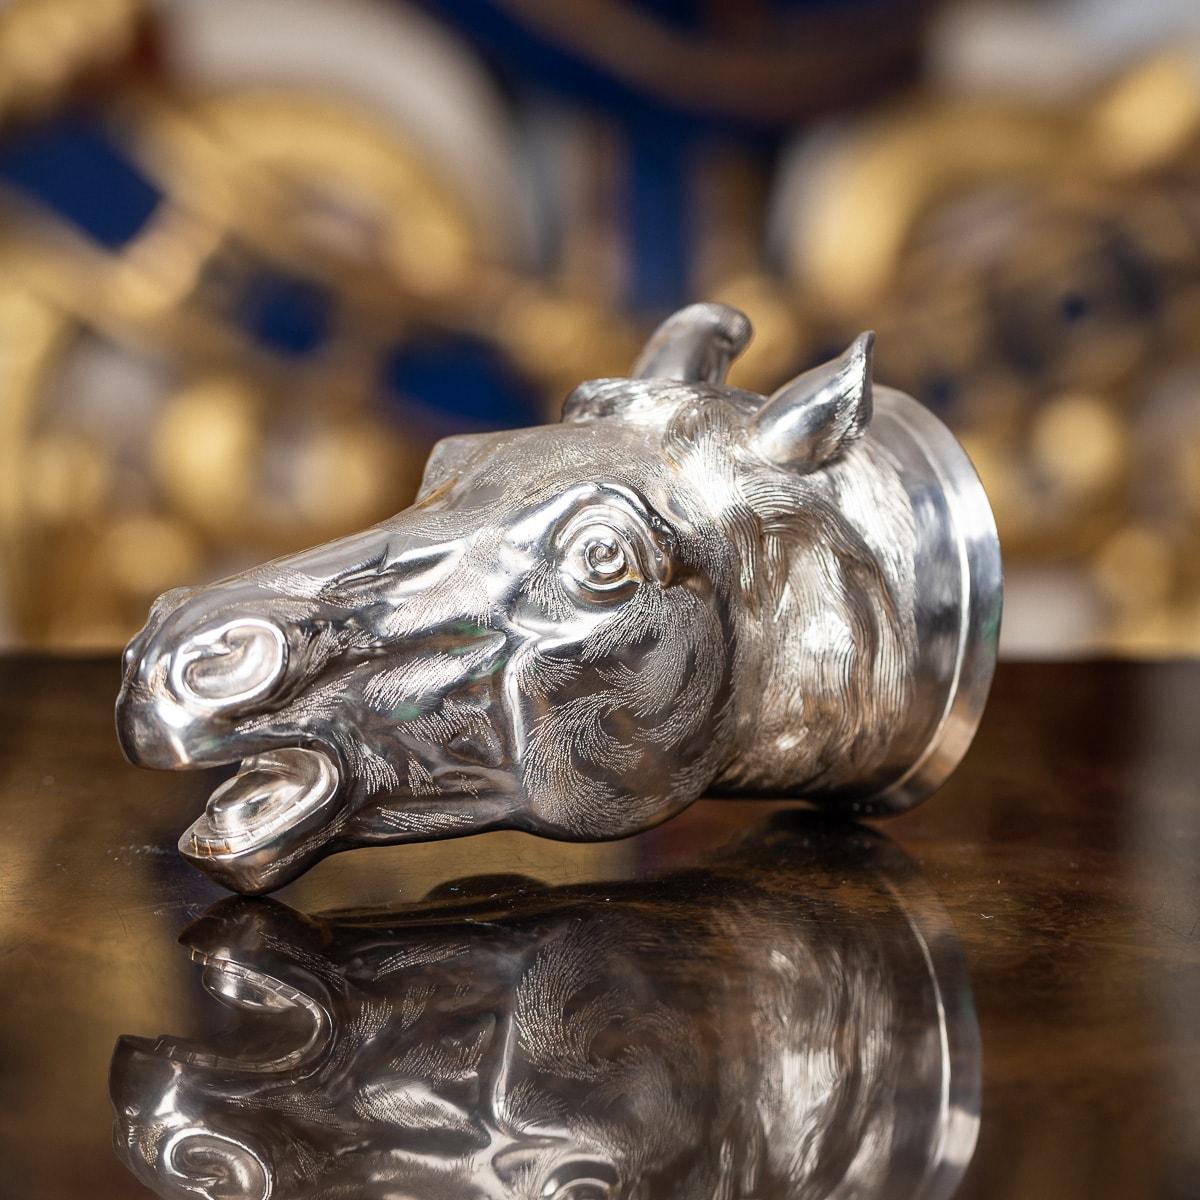 Antique early-20th Century Victorian solid silver stirrup cup, the head realistically cast as a horses head, with ears pricked, eyes wide open, plain collar and richly gilt interior. Victorian stirrup cups modelled as horse are extremely rare and